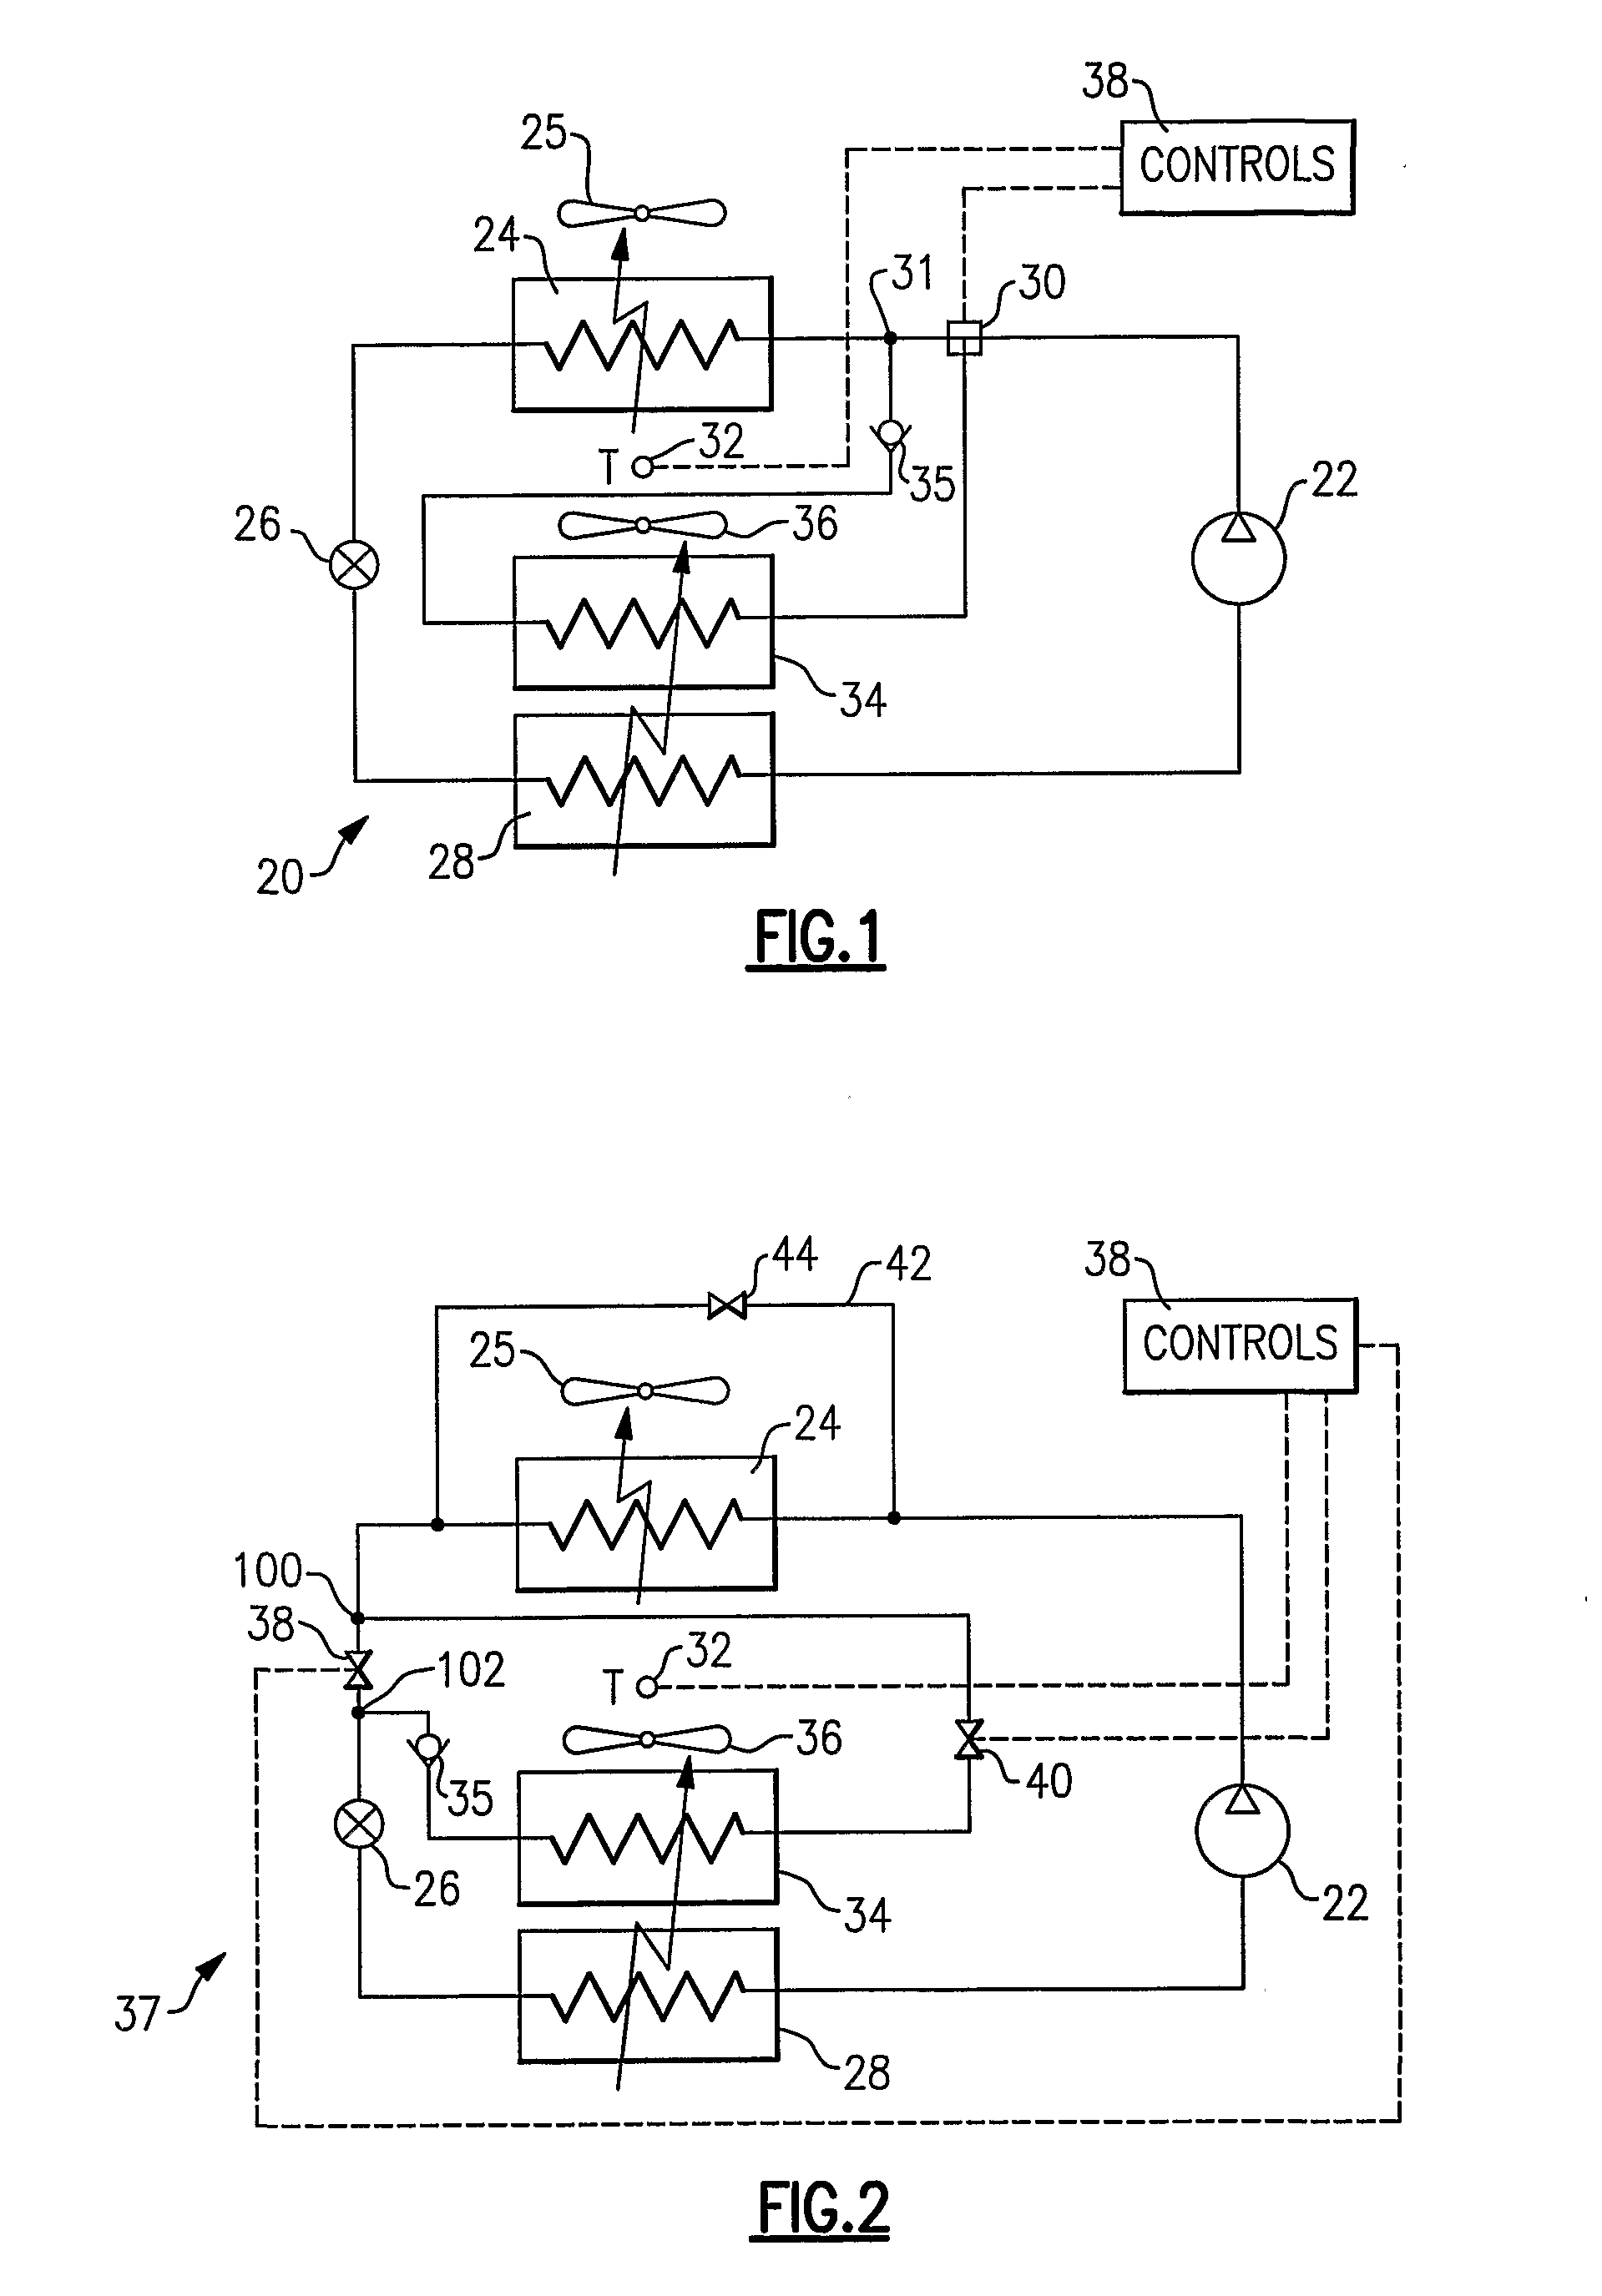 System Reheat Control by Pulse Width Modulation